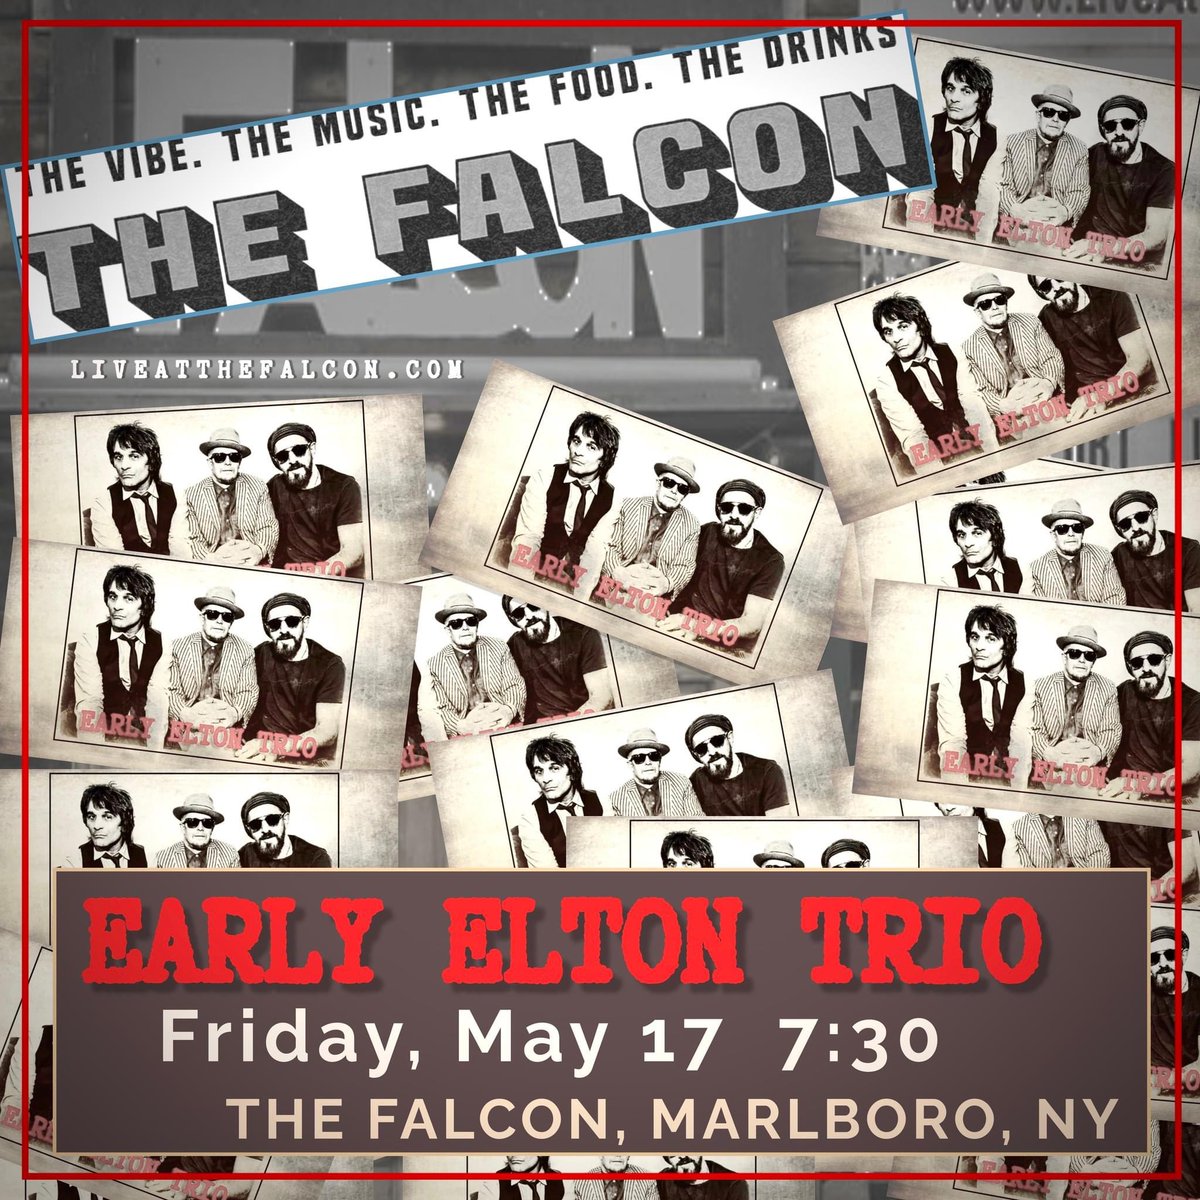 Join @EarlyEltonTrio FRI, MAY 17 at the fabulous The Falcon in Marlboro, NY. A Hudson Valley gem to watch and play music! Dining: 5:30-9pm Show: 7:30pm INFO/REX: liveathefalcon.com @jontone @richpagano